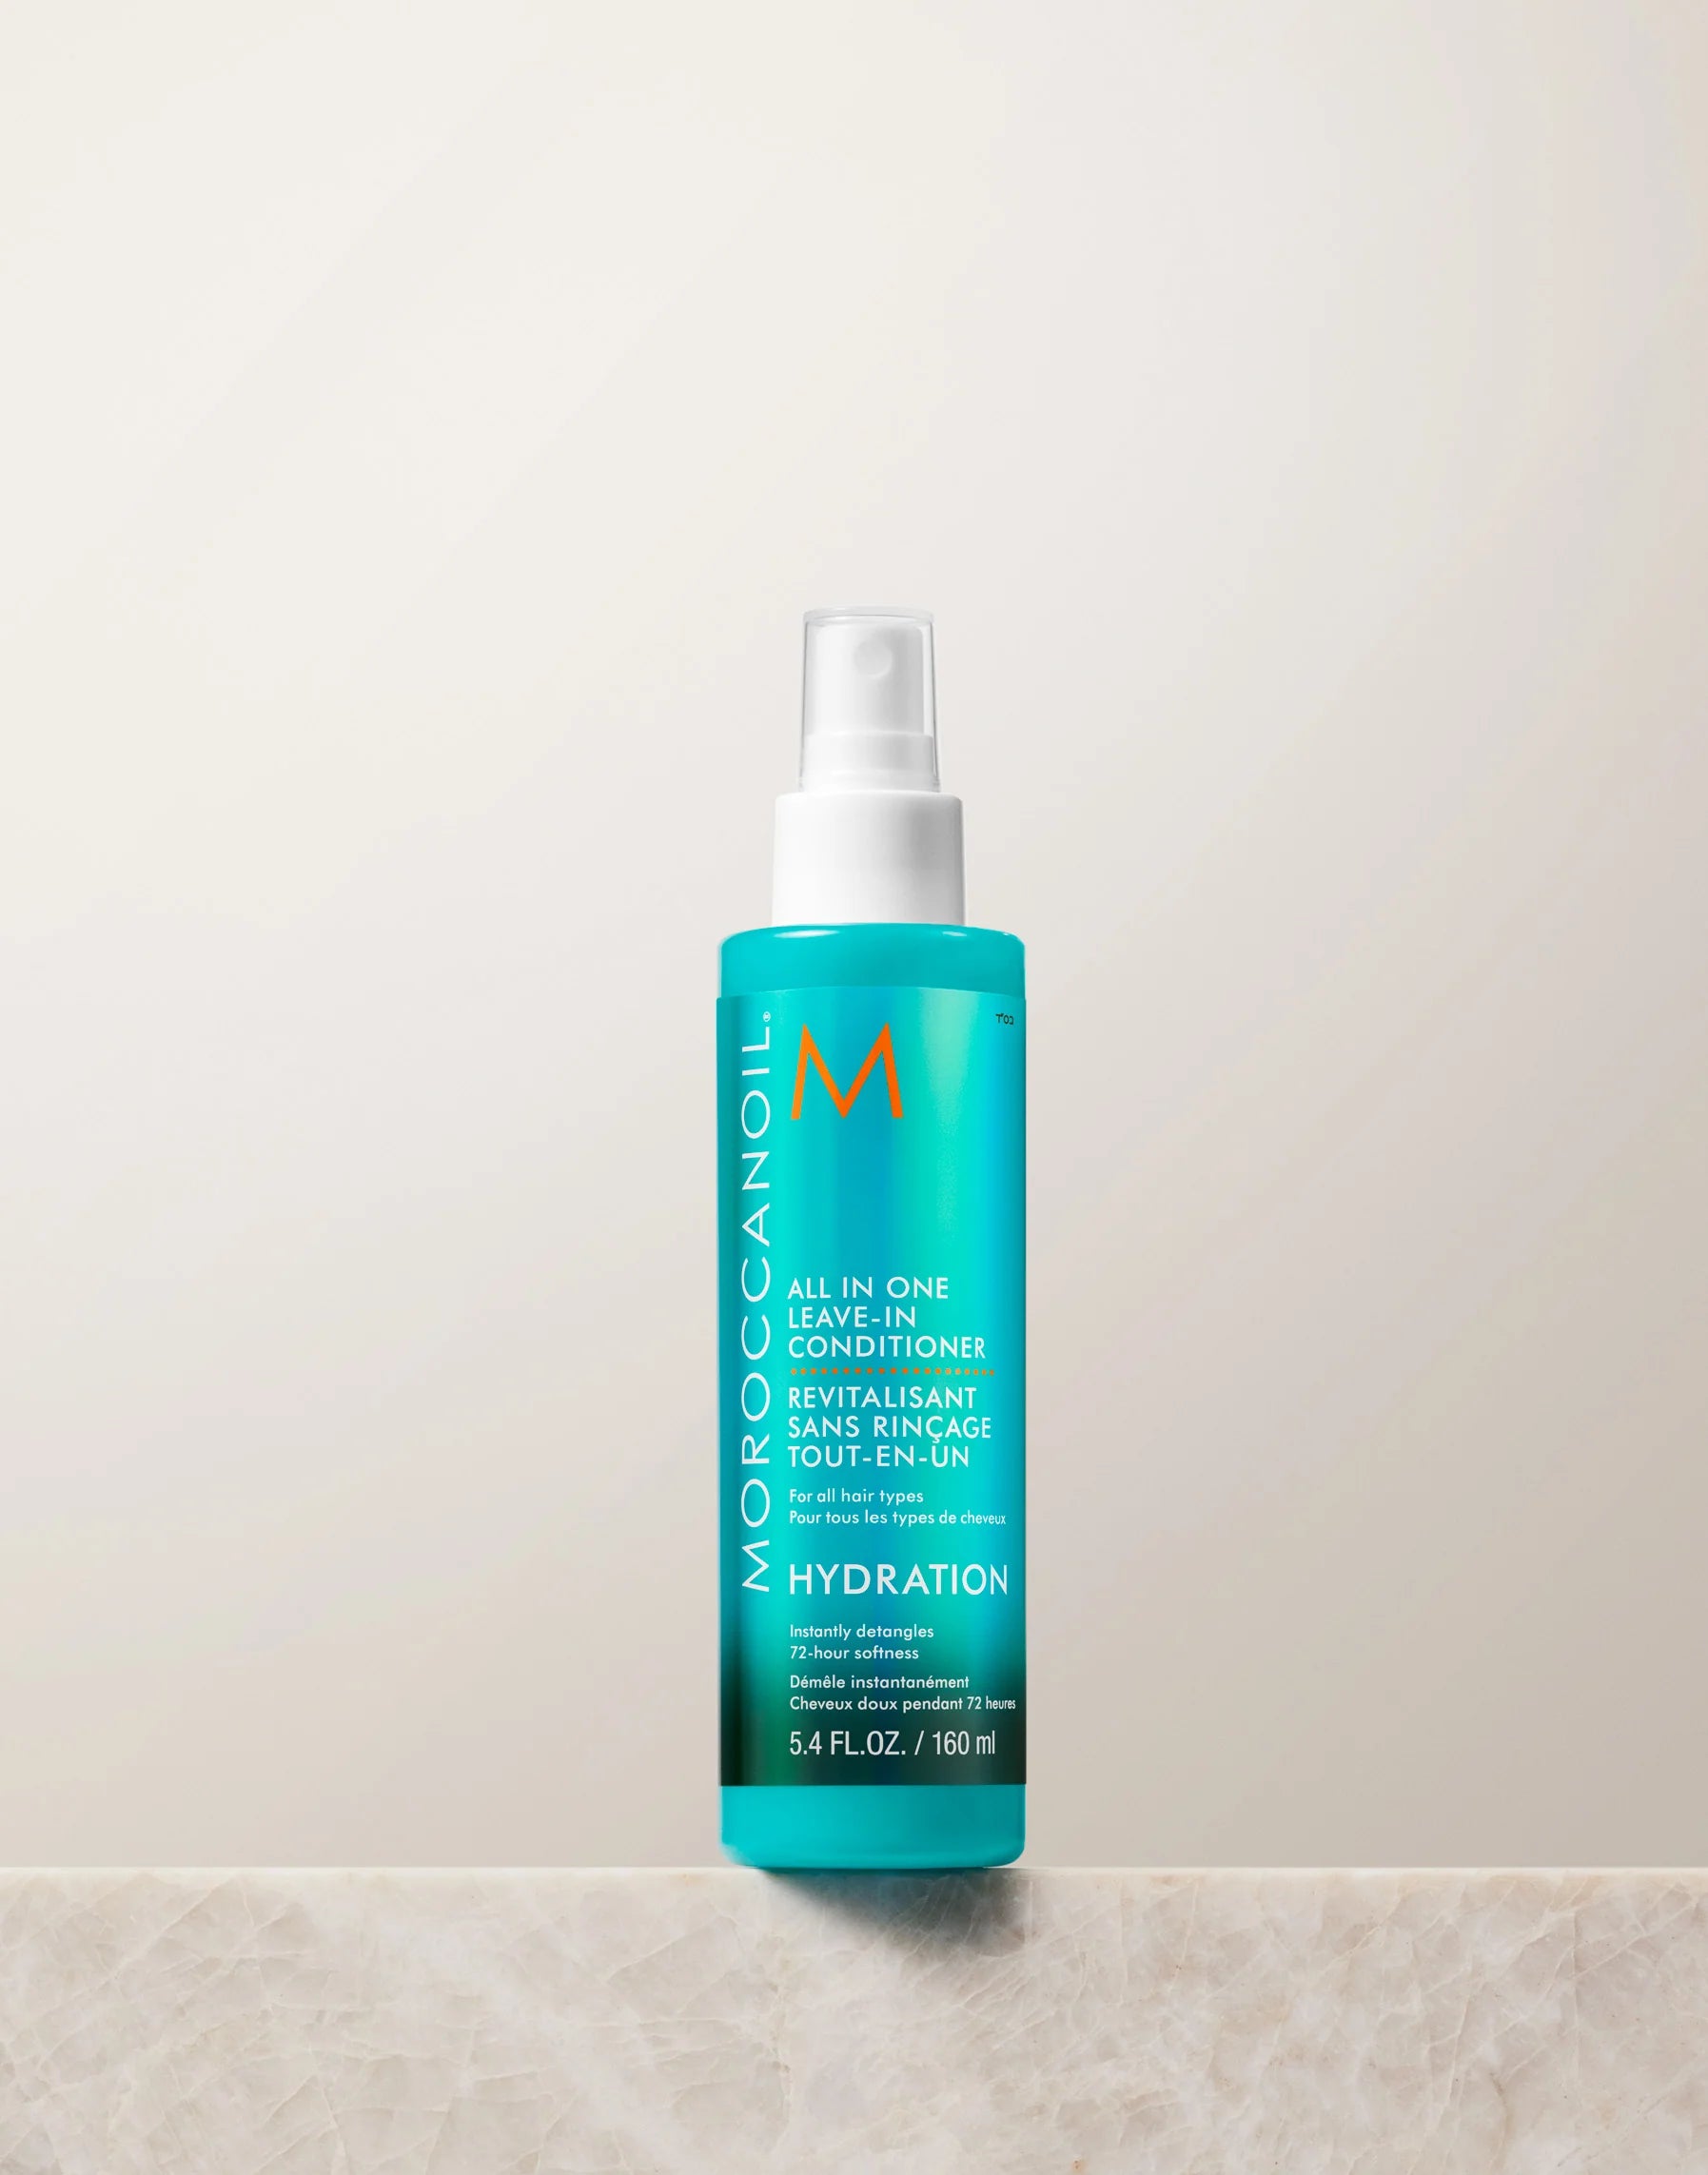 Hair detangling spray (MoroccanOil All in one Leave-In Conditioner)